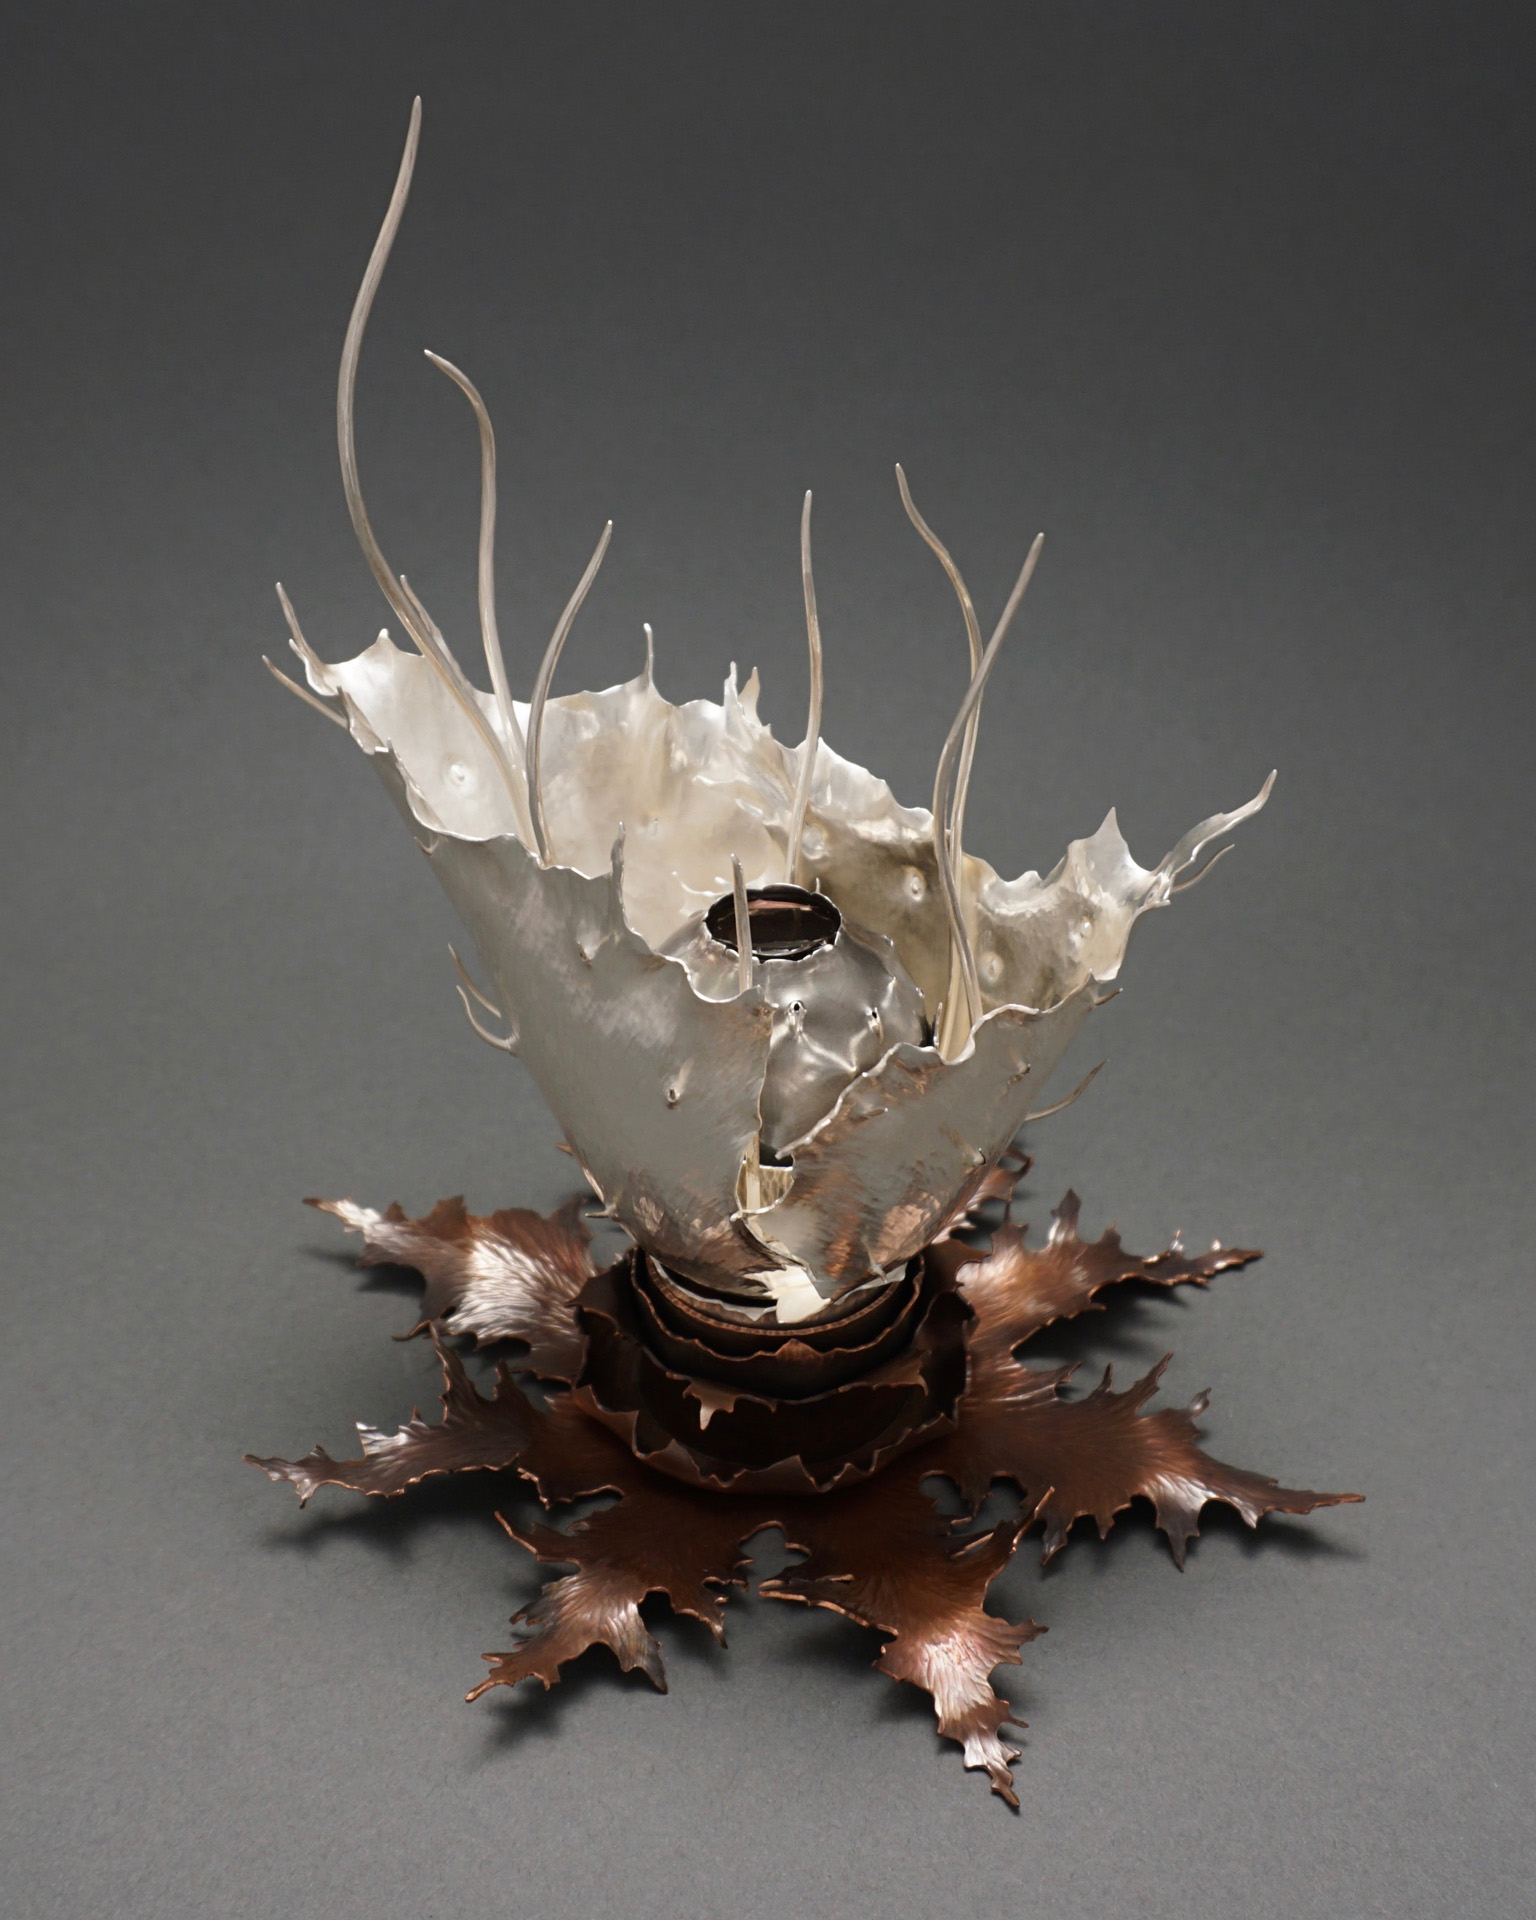 Jessica Mohl, Crawfordsville, IN, USA. “Hiddenness,” silver, copper, glass lens, amethyst geode.